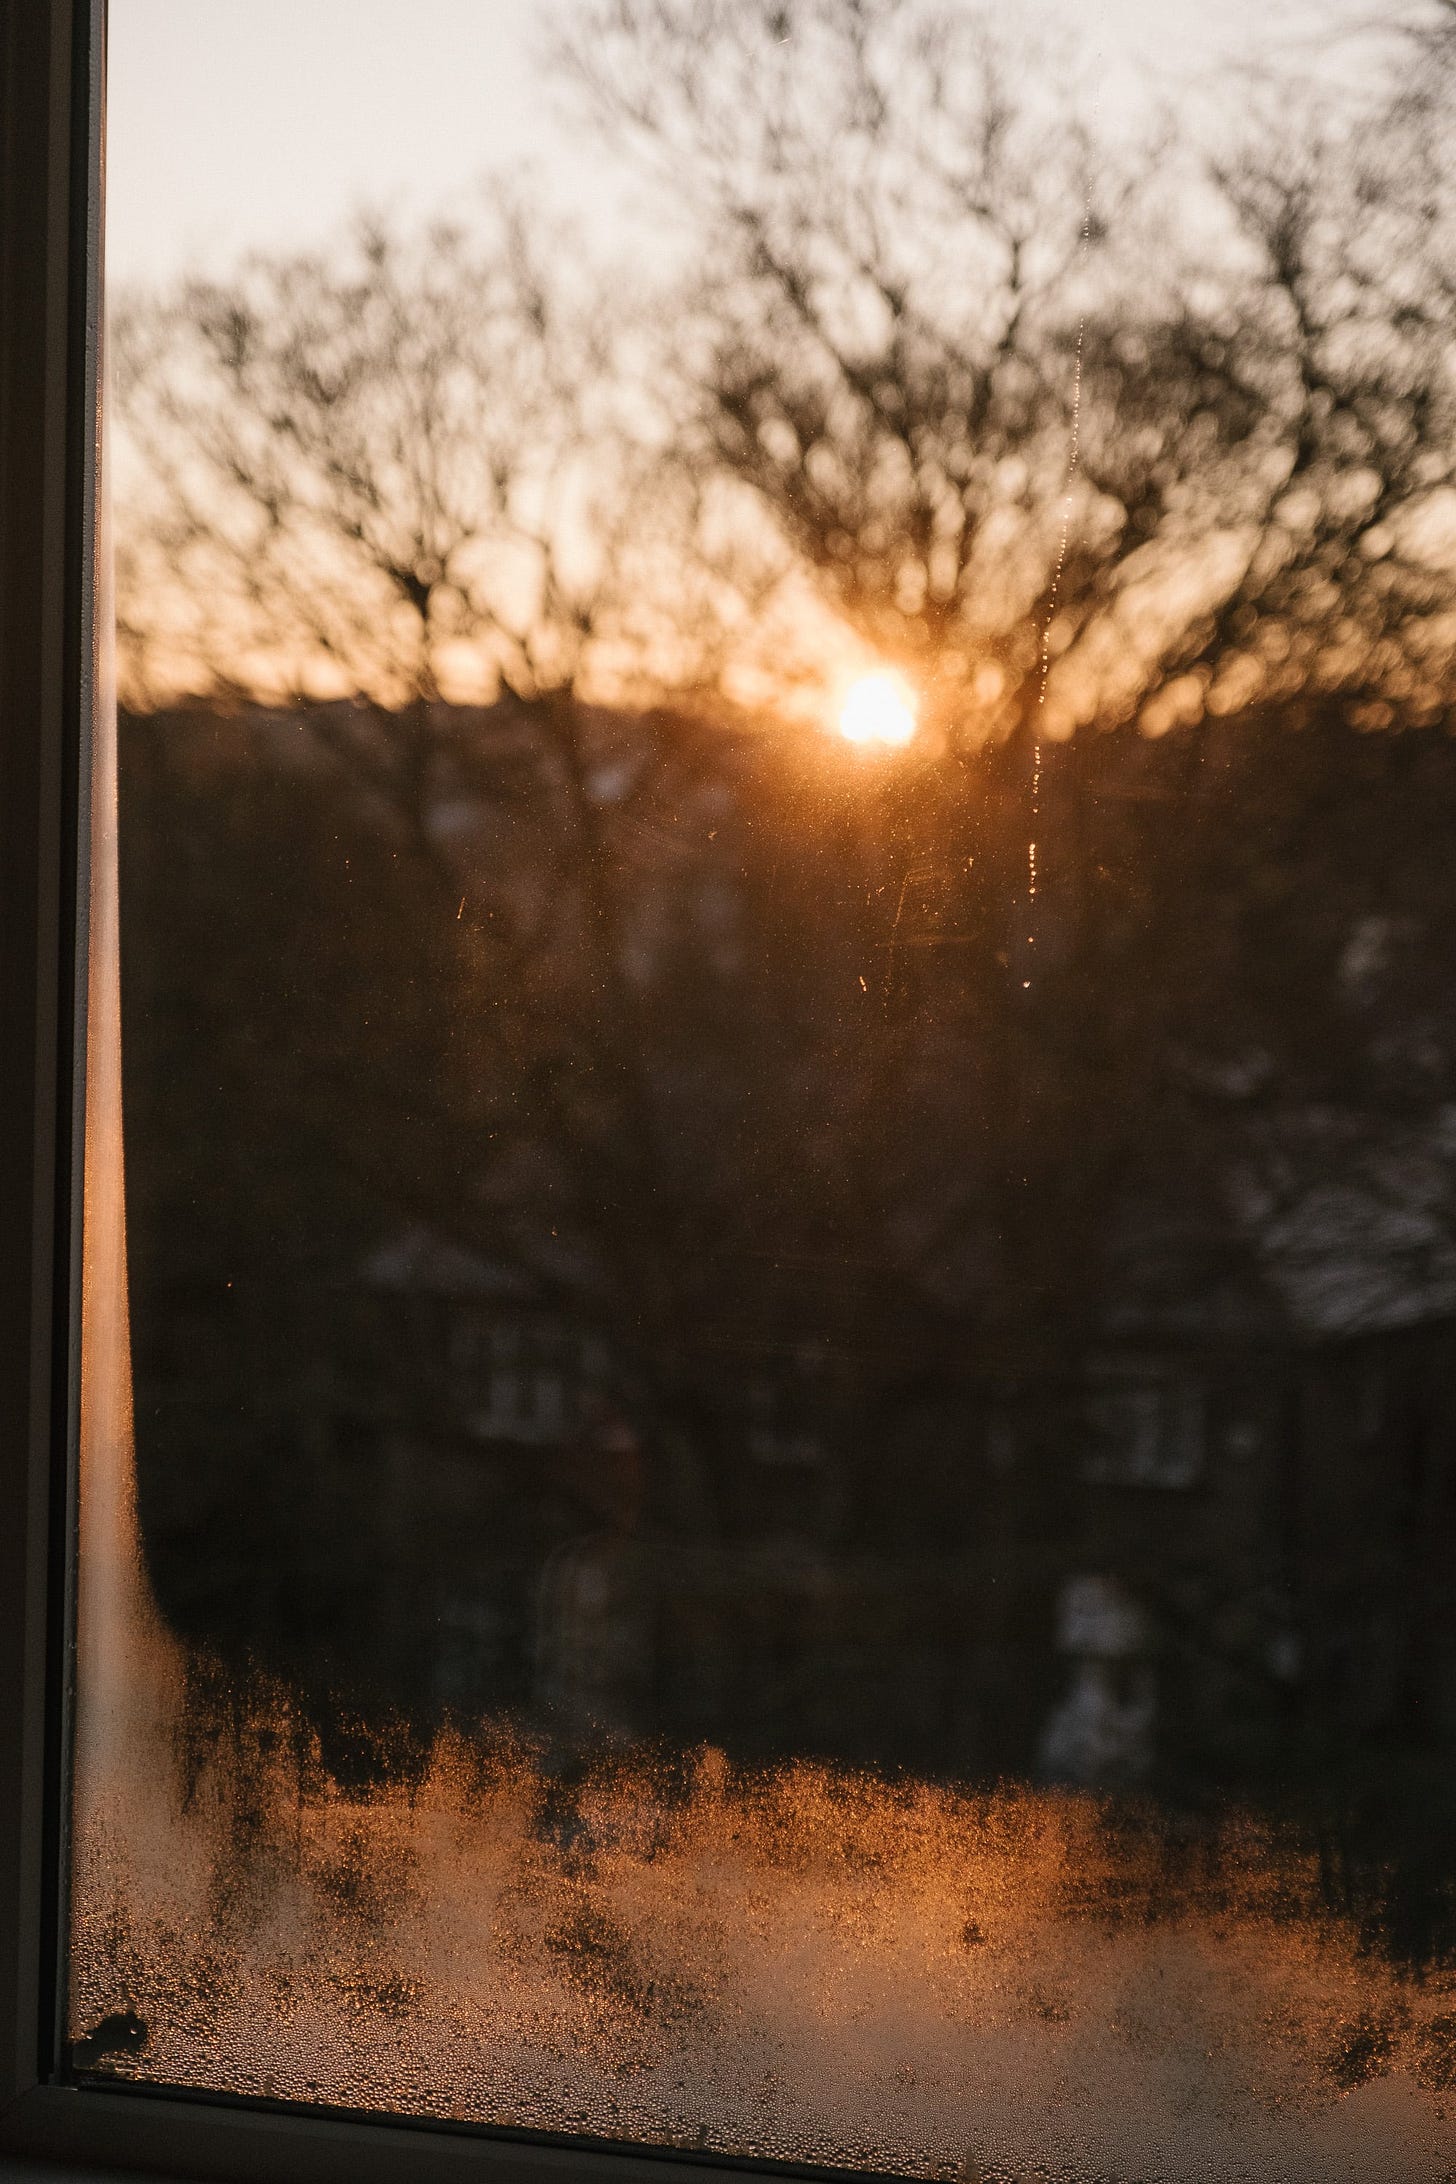 A sunrise through a window that is steamed up at the bottom. Outside the window is out of focus but trees with no leaves are visible.